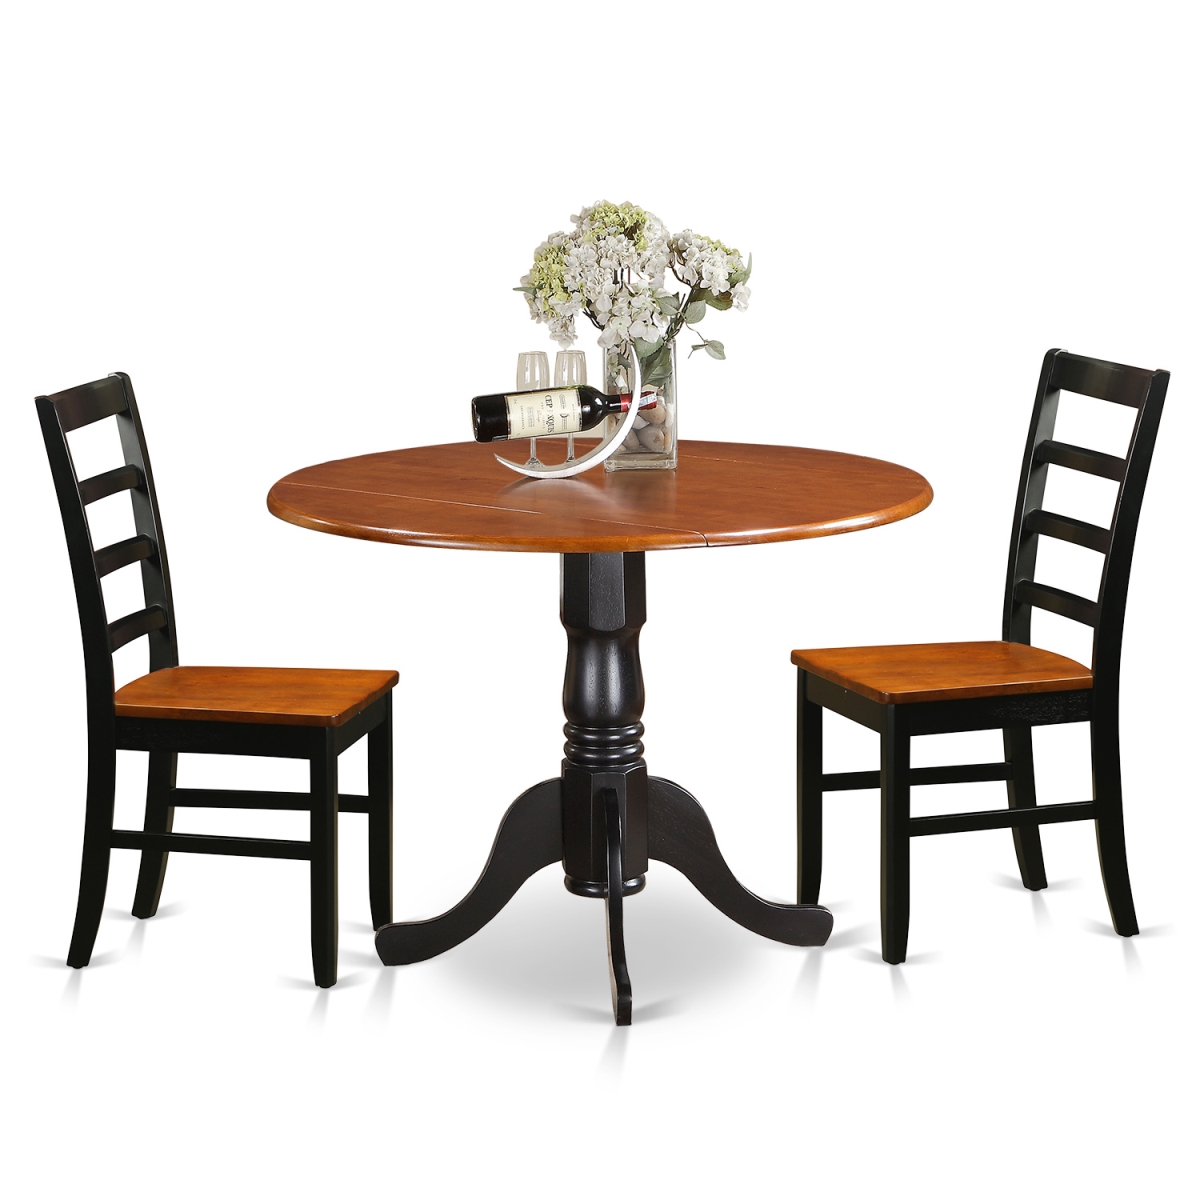 Picture of East West Furniture DLPF3-BCH-W Dublin Kitchen Table Set - Dining Table & 2 Wooden Chairs, Black & Cherry - 3 Piece